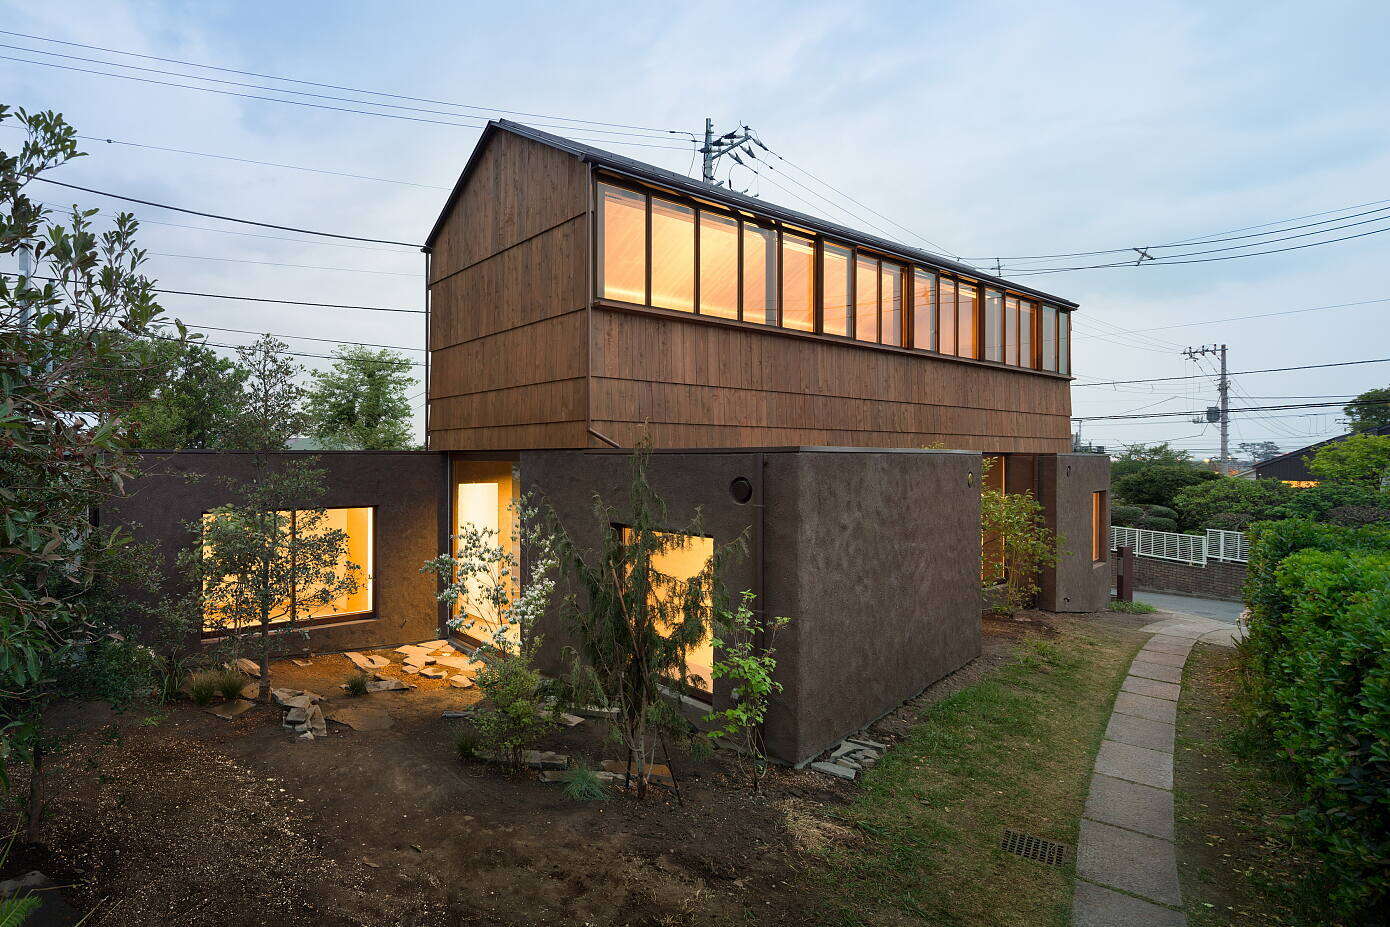 House for Oiso by Lina Ghotmeh – Architecture